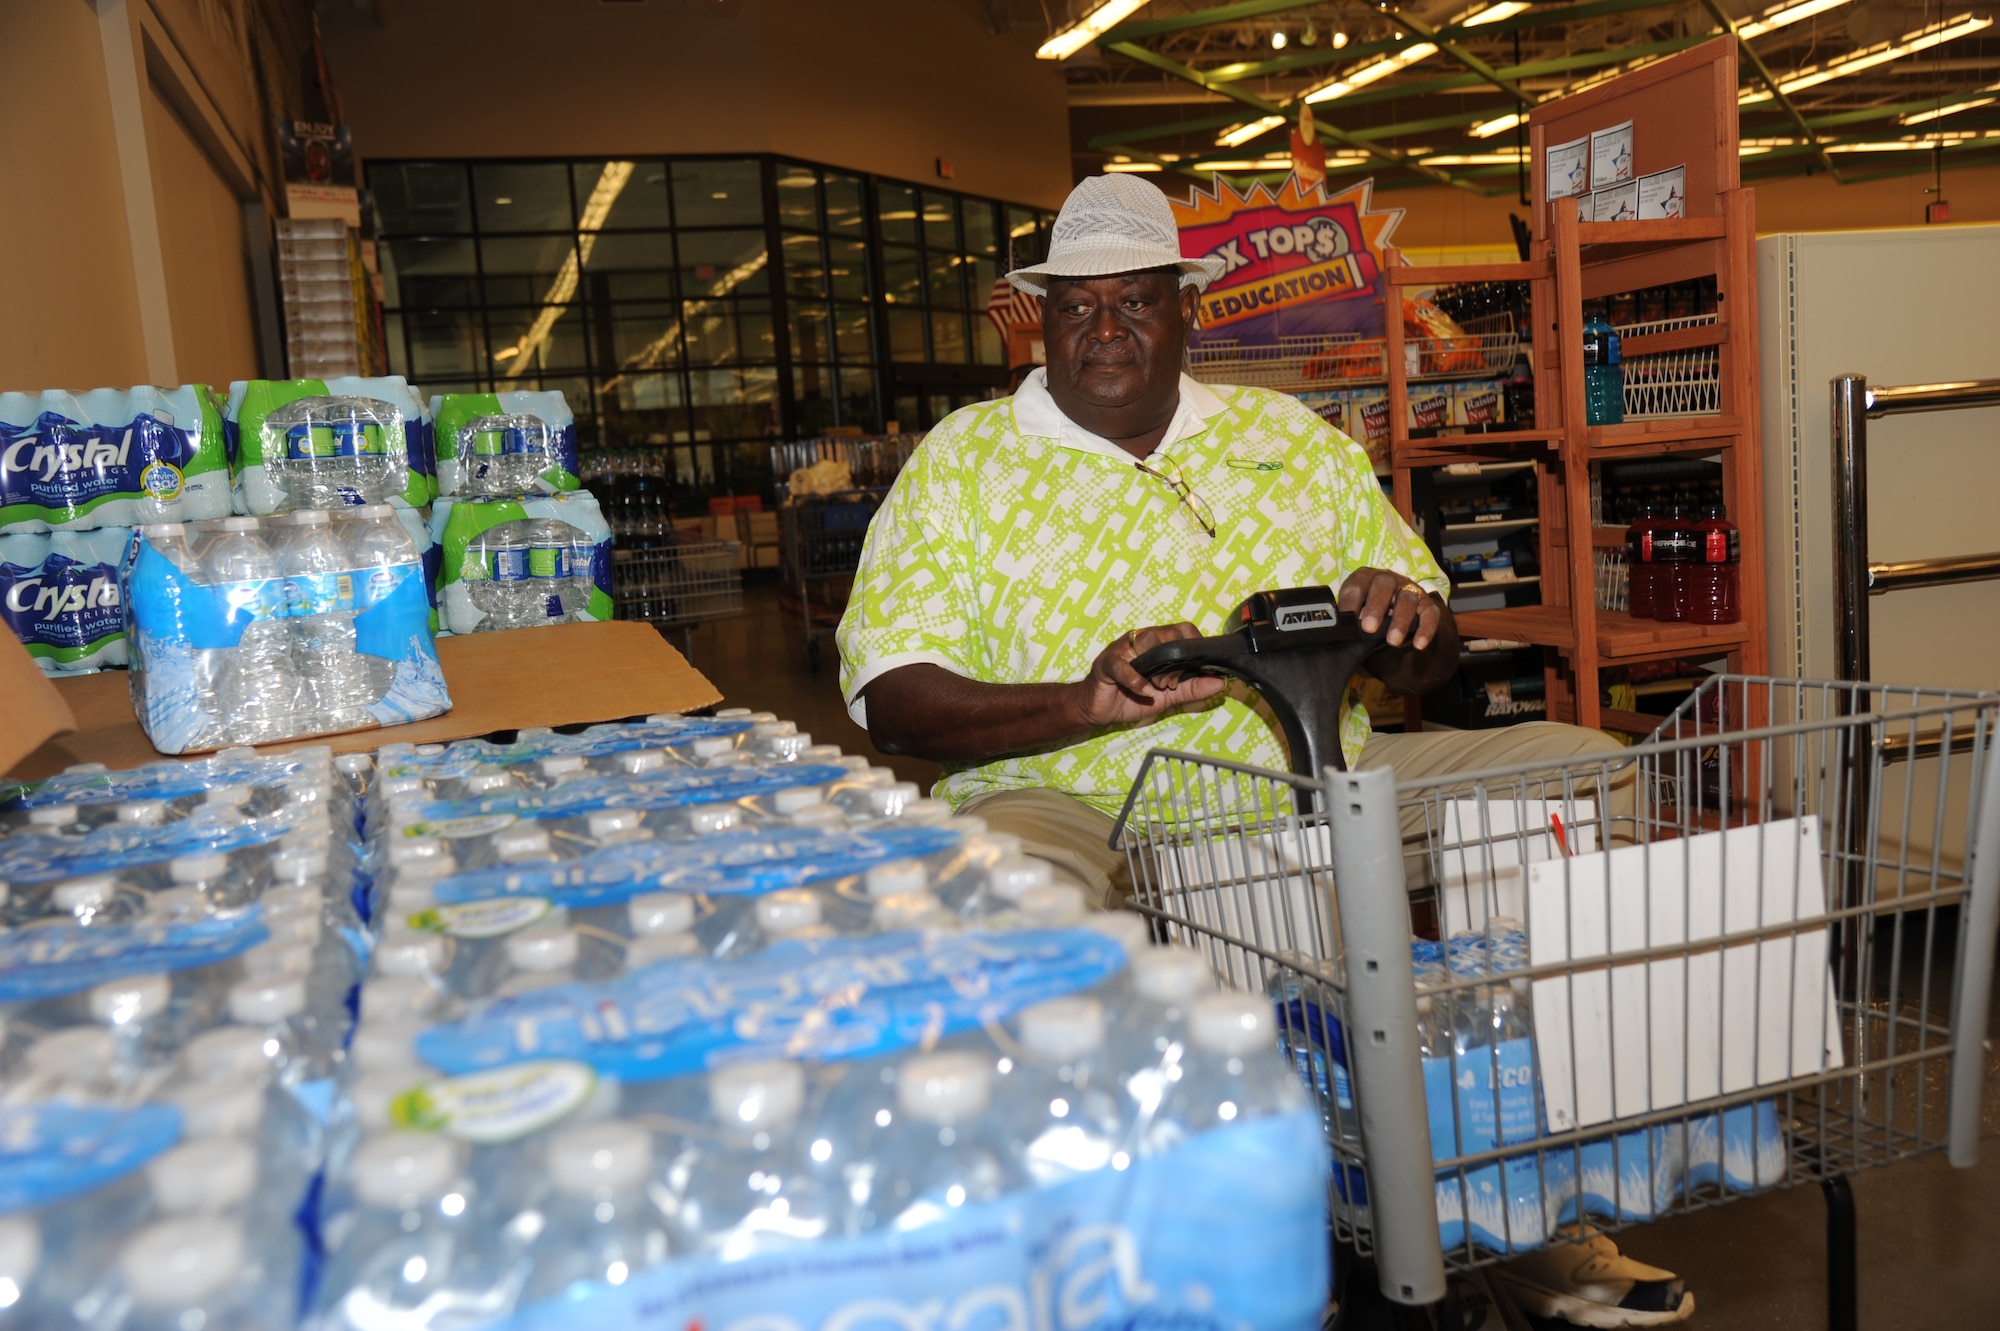 A.J. Breland, Army retired of Brooklyn, Miss., loads his grocery cart with cases of water and other hurricane supplies into her trunk Aug. 27, 2012, at Keesler Air Force Base, Miss.  Keesler personnel are taking preventative measures to prepare and protect themselves and Keesler's assets as the base commander has declared HURCON 3, meaning destructive winds of 58 MPH or greater are expected as Isaac approaches. (U.S. Air Force photo by Kemberly Groue)